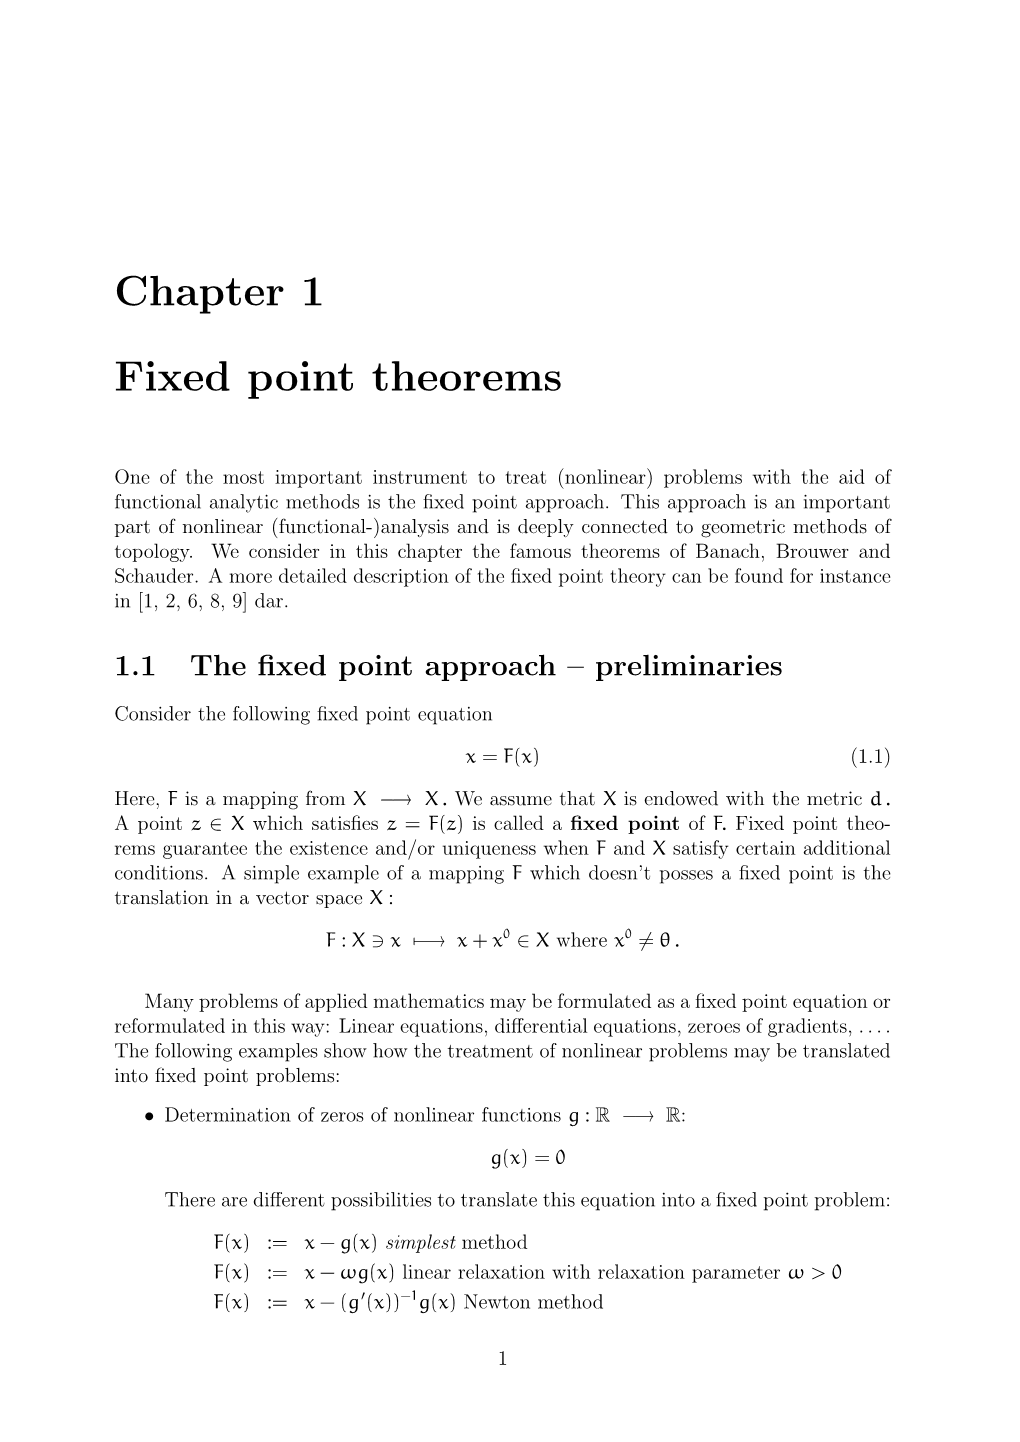 Chapter 1 Fixed Point Theorems